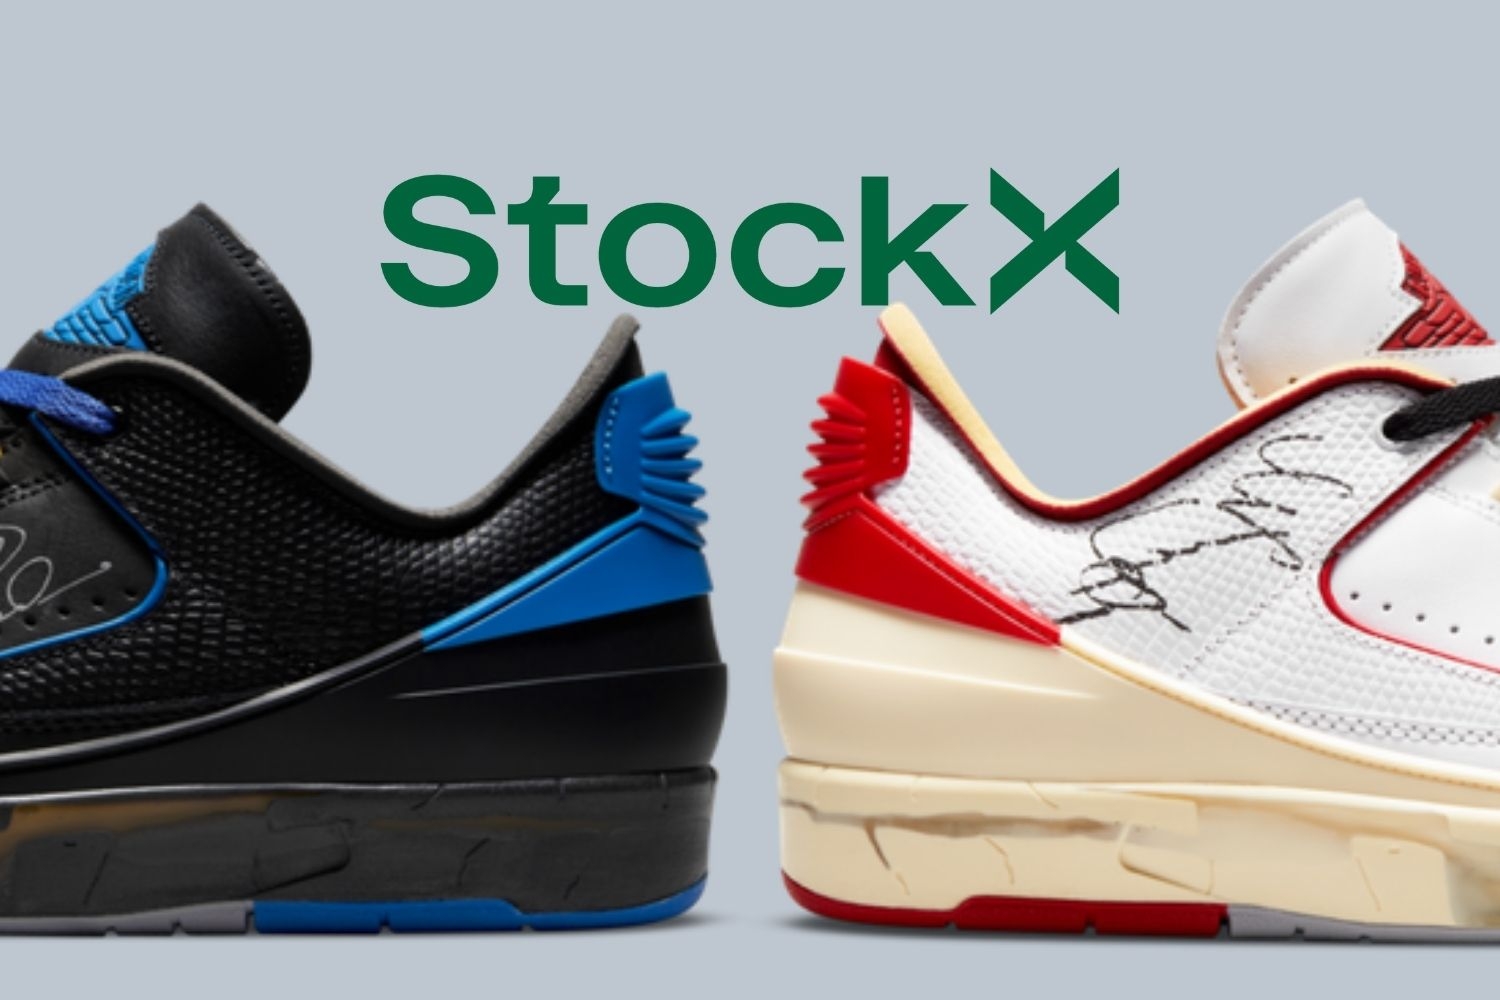 The top 10 most bought sneakers at StockX